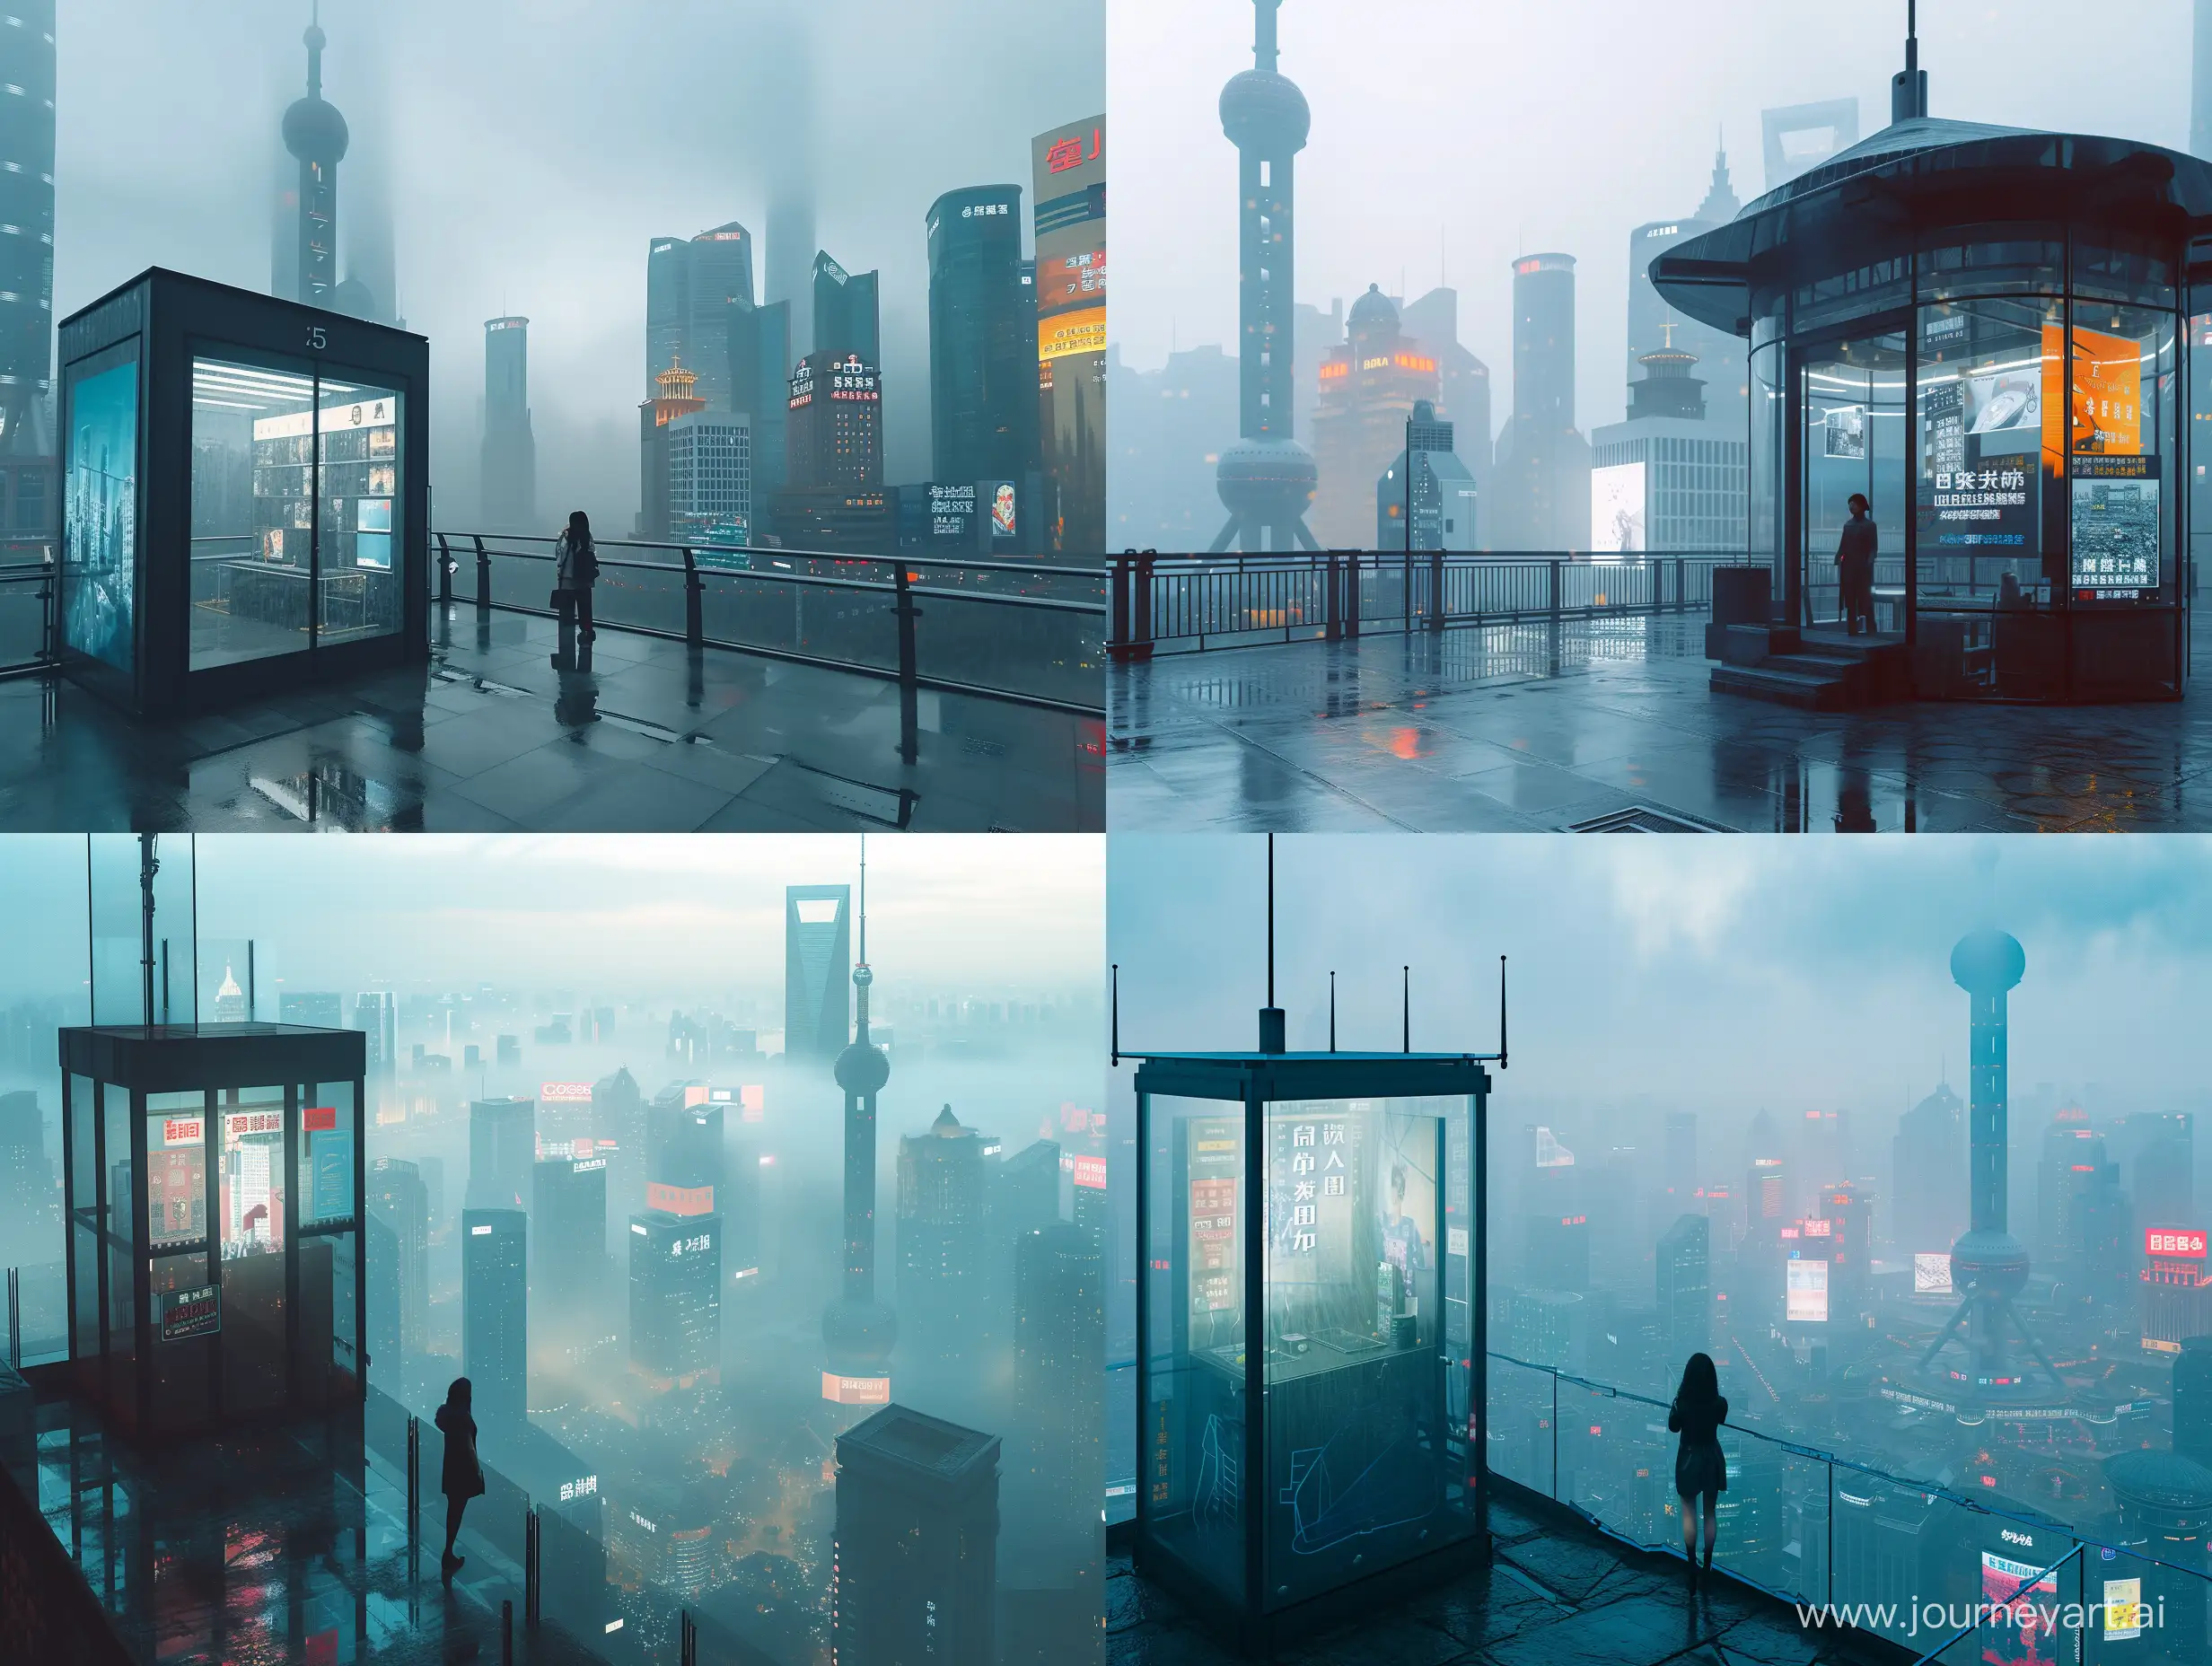 a bustling large Procedural shanghai cityscape, the photo is bathed in natural lighting, relaxing setting. Shot in 4k with a high end DSLR camera. such as a Canon EOS R5 with a 50mm f/1. 2 lens, creative architectures, full view, skyline, vivid, foggy, dystopian, science fiction, skyline, billboards, nature, year 2100 futuristic, a cyberpunk woman standing inside a  building near a glass looking at the viewer, landscape, environment, synthwave,
